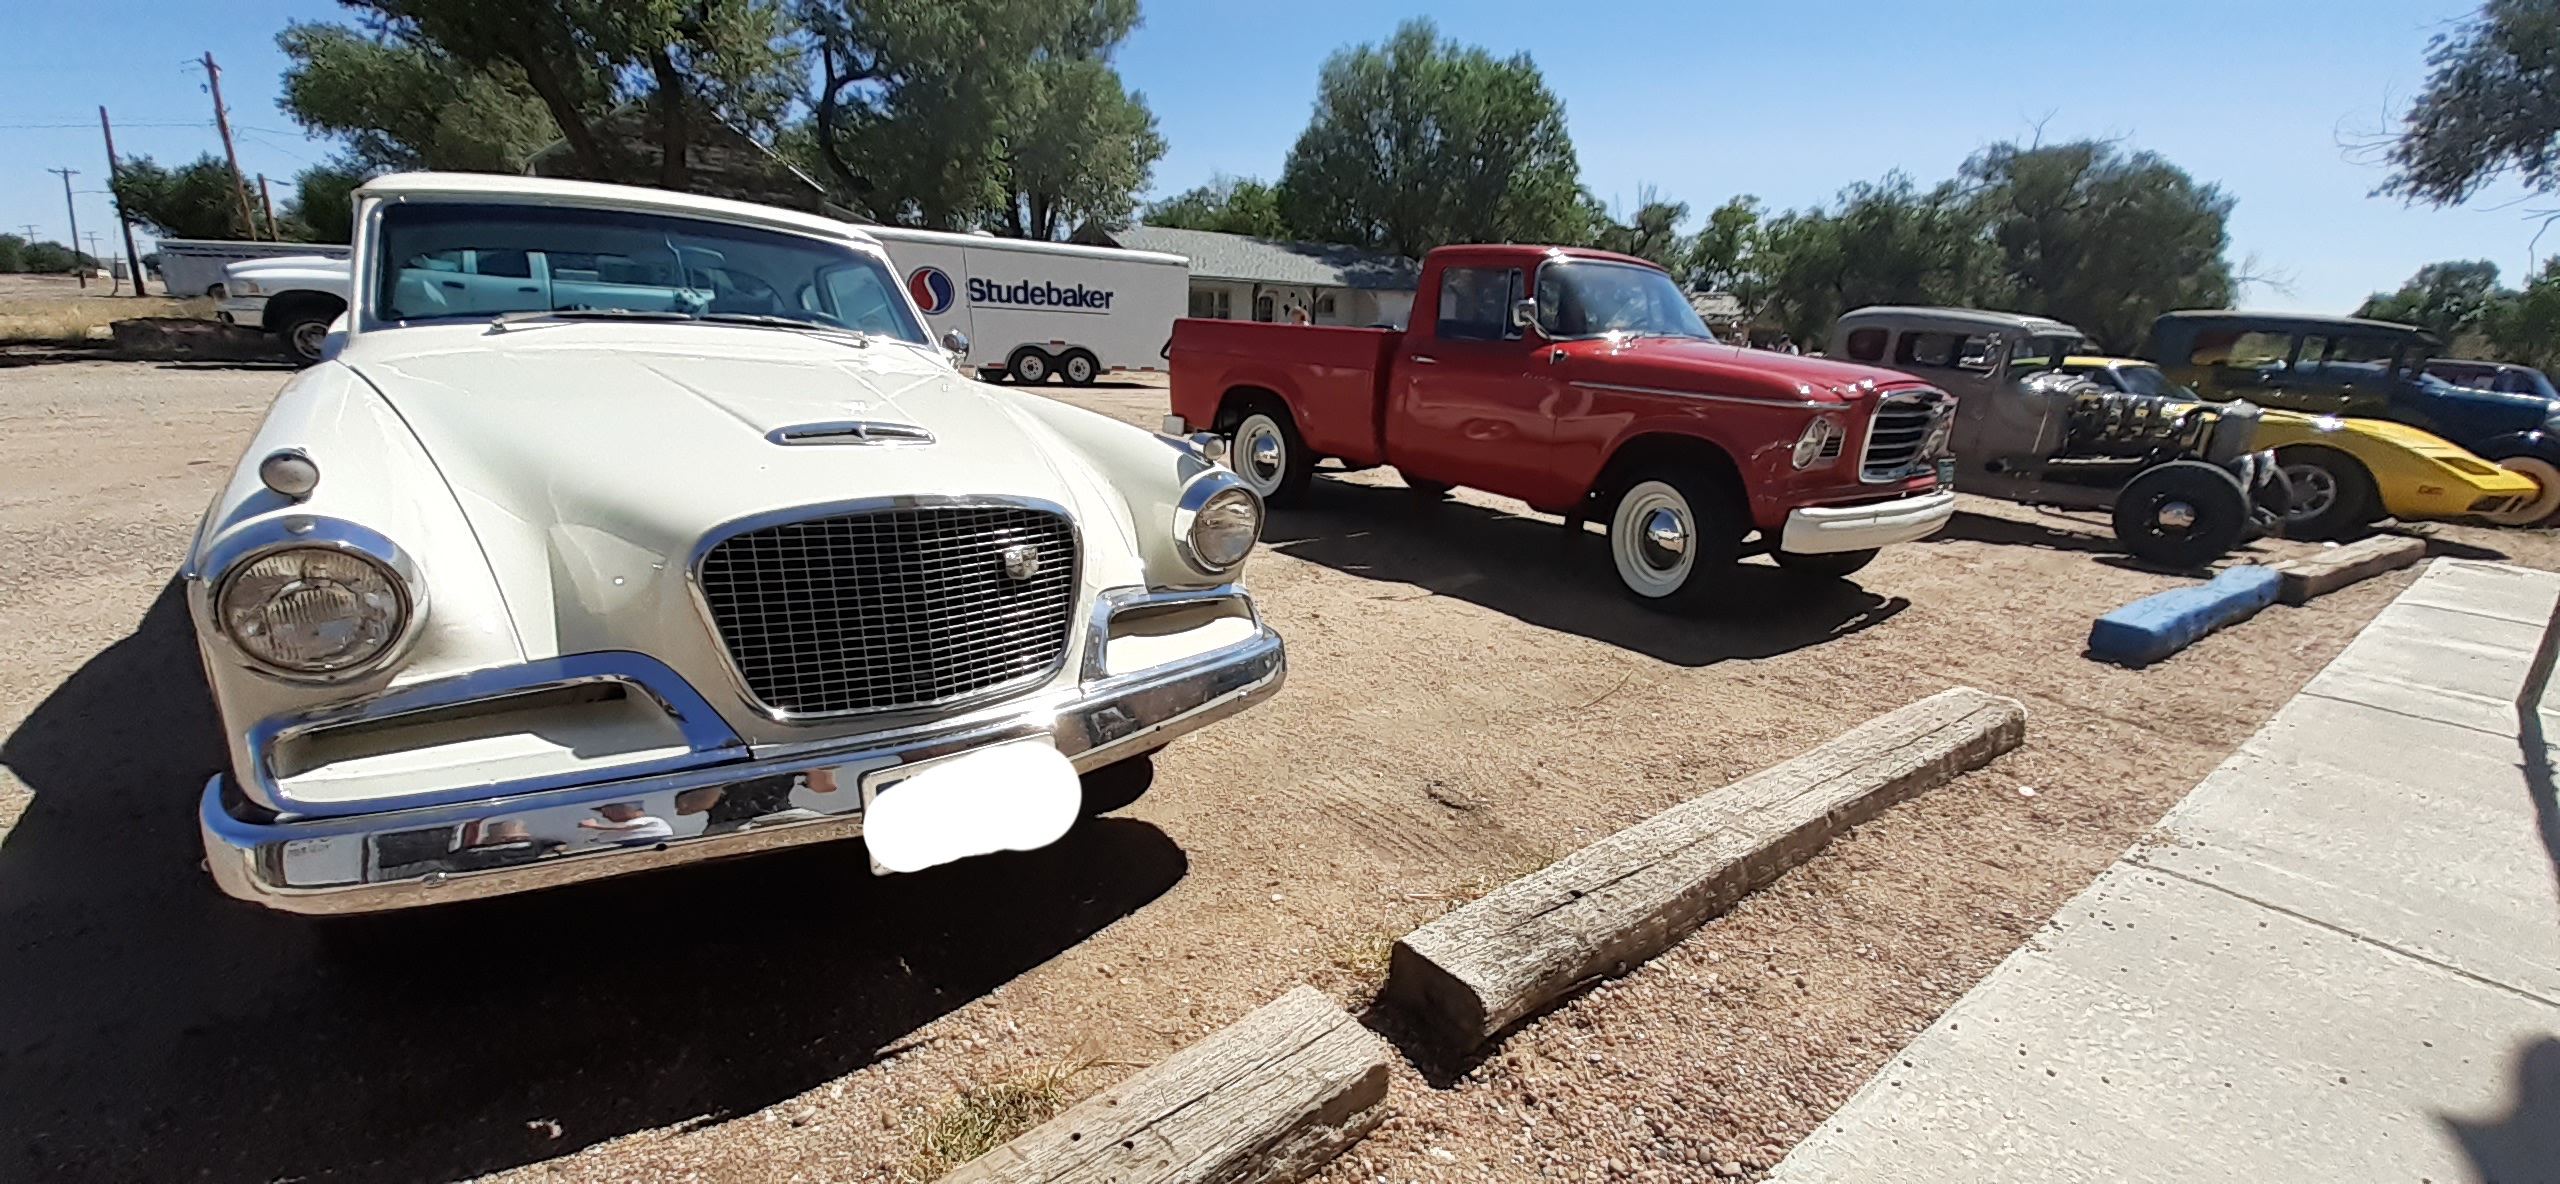 National drive your Studebaker day seconews.org 